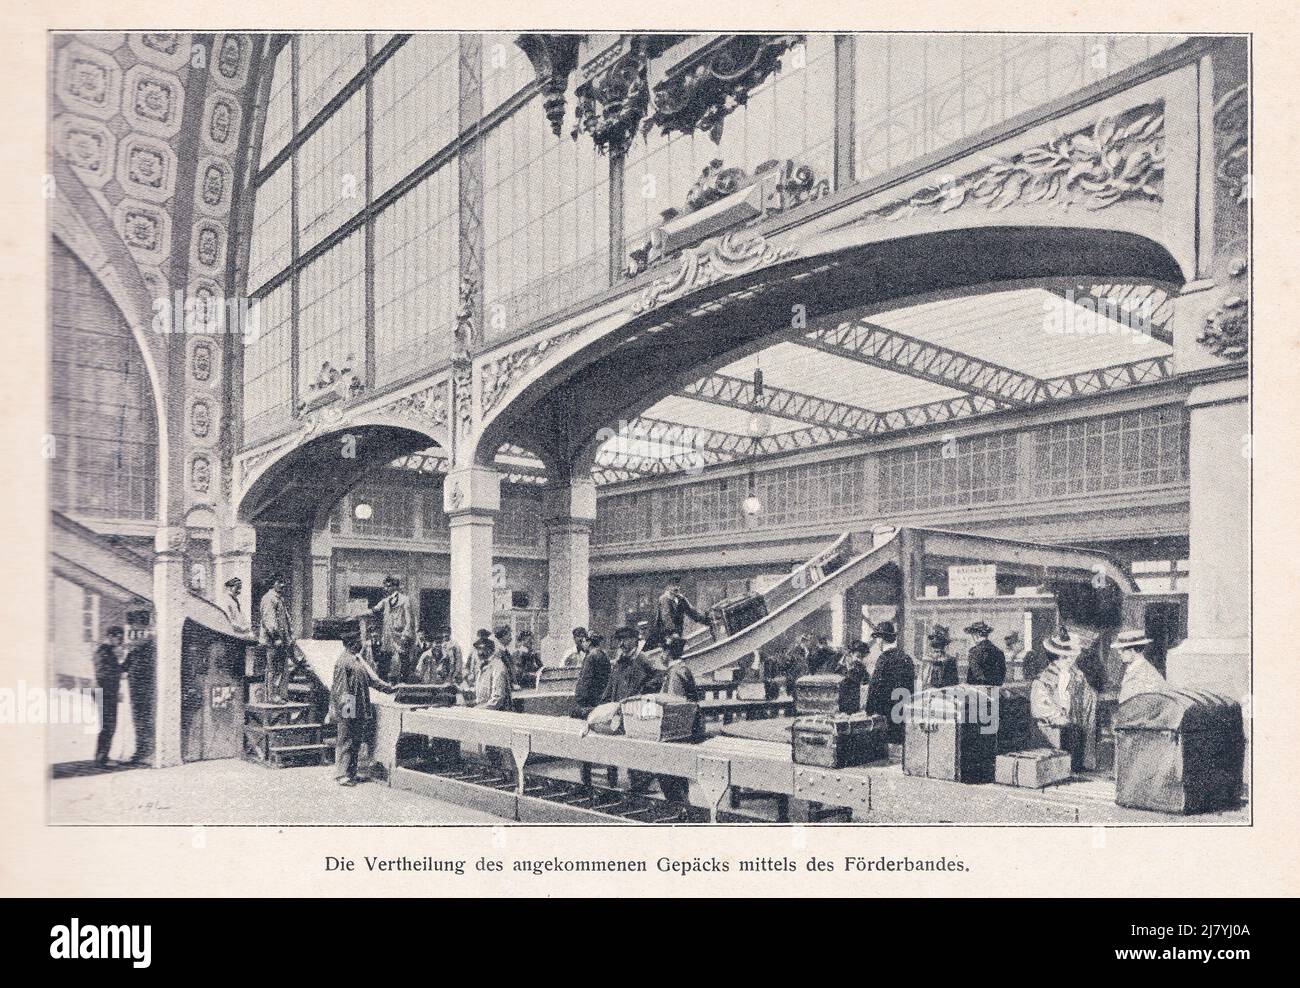 the distribution of the arrived baggage by means of the conveyor belt in Metro Station Palais Royal paris 1900th Stock Photo